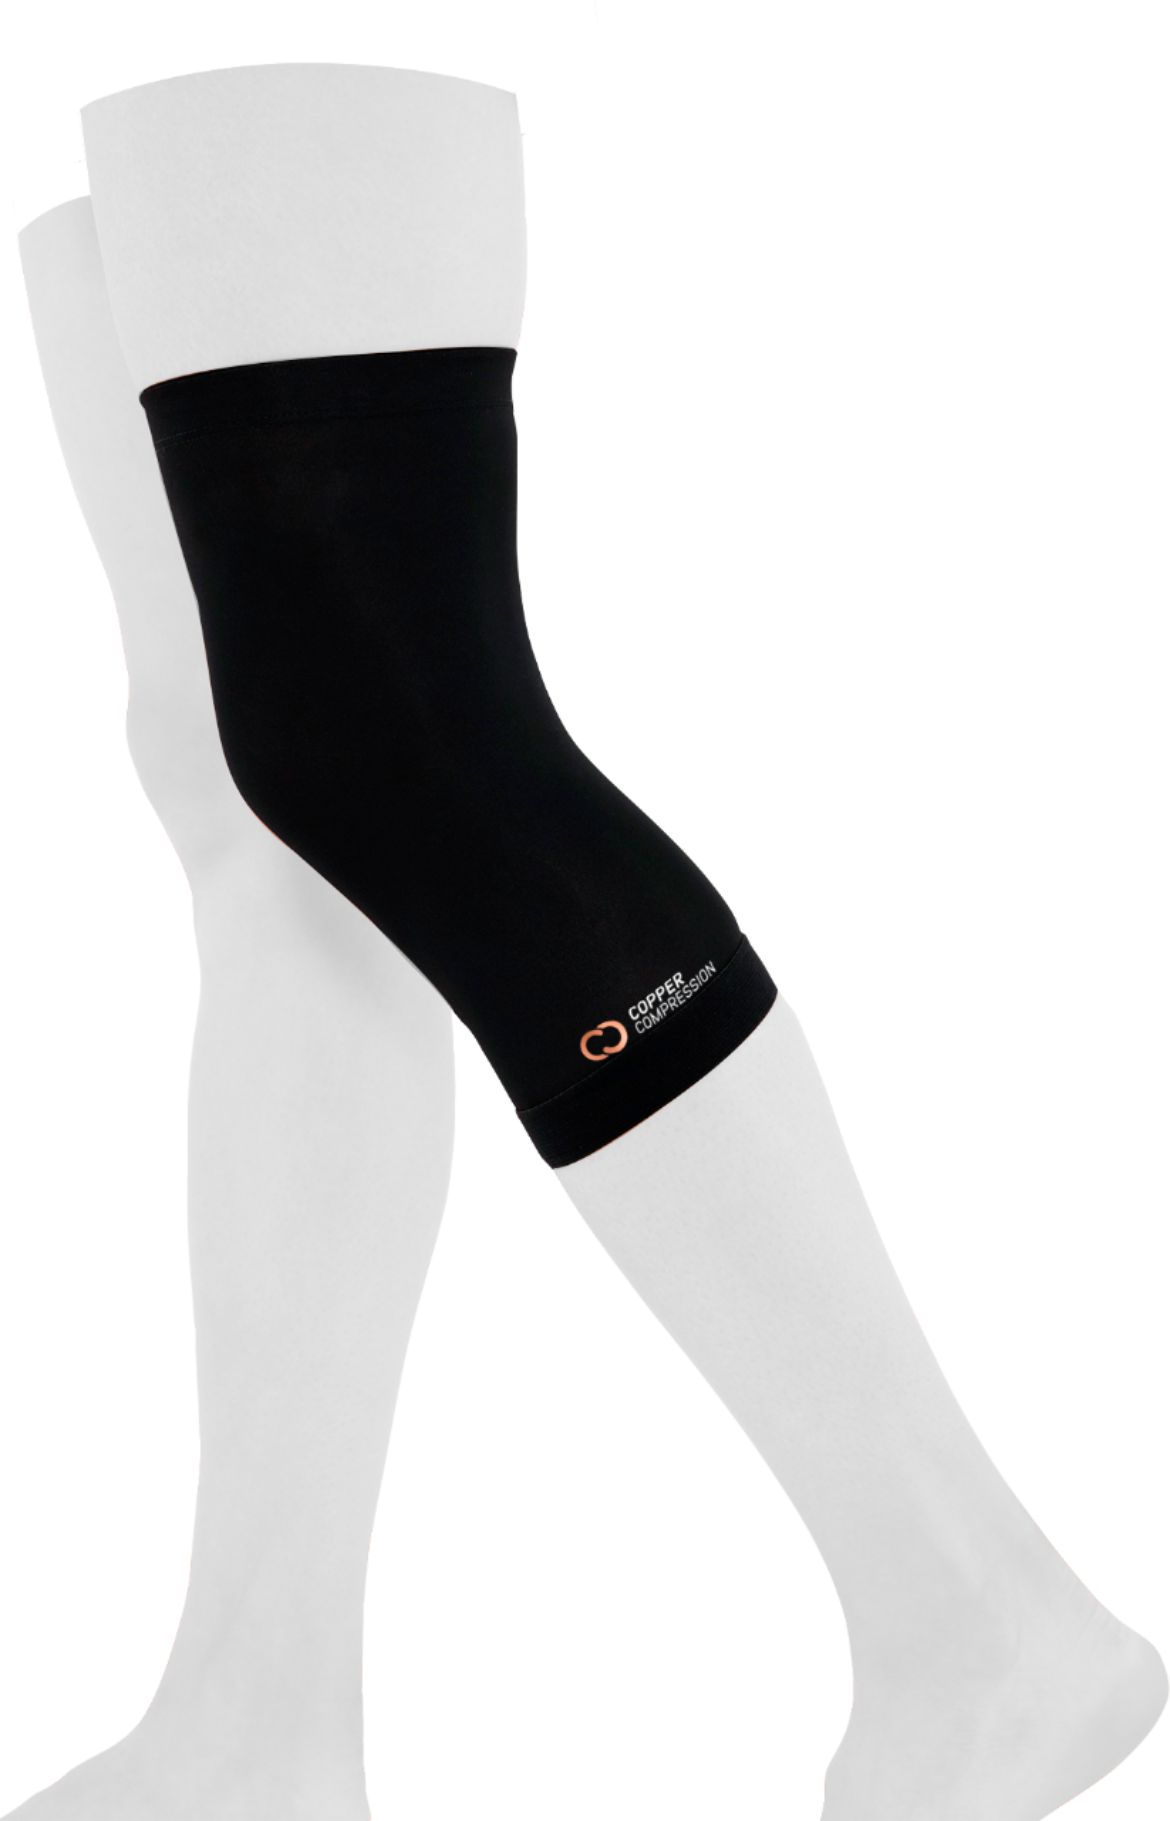 Copper Compression - Copper Infused Knee Sleeve - Small/Medium - BS3